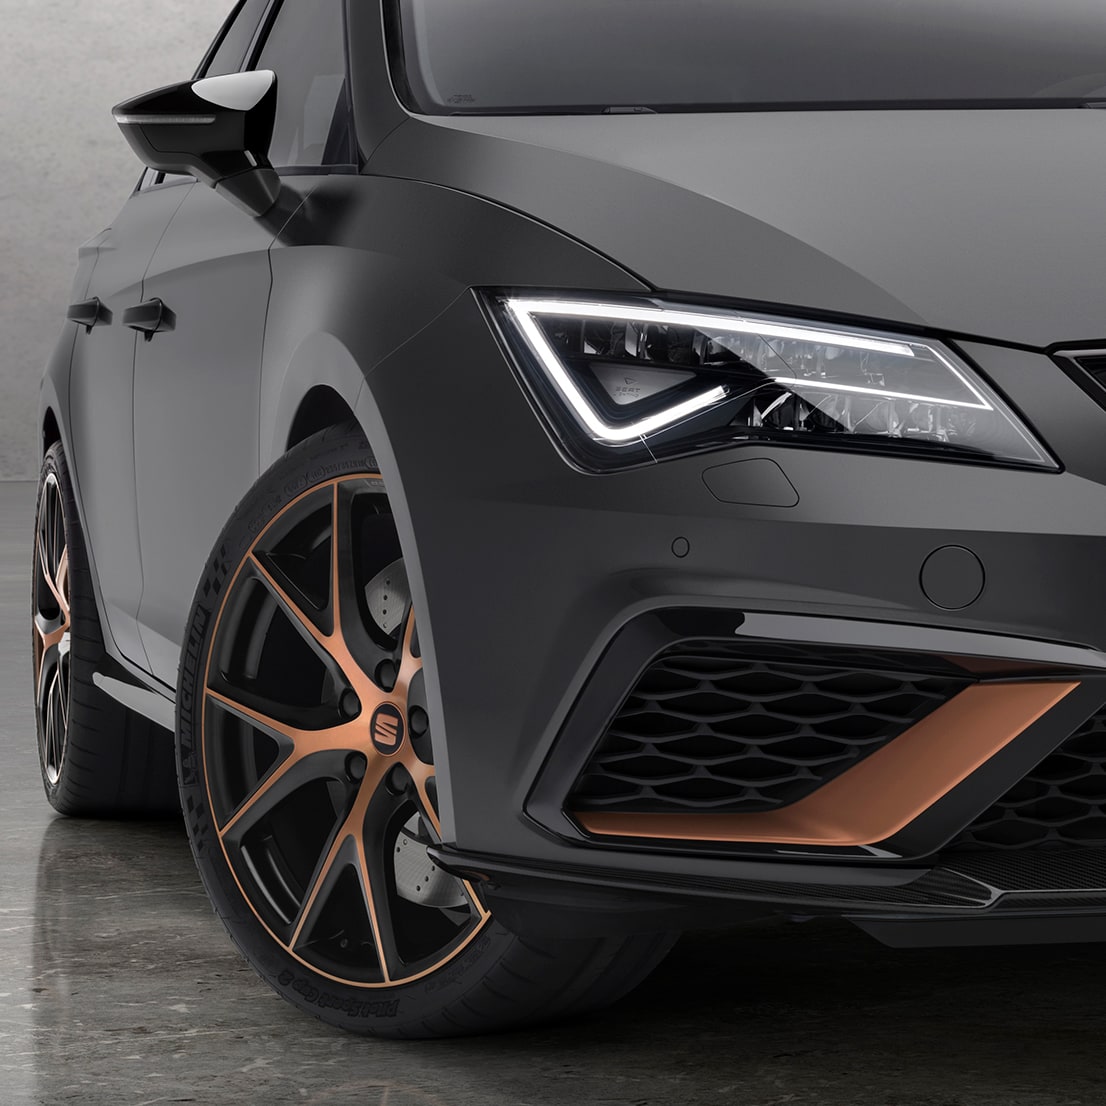 Leon CUPRA R Edition front wheel with copper detailing